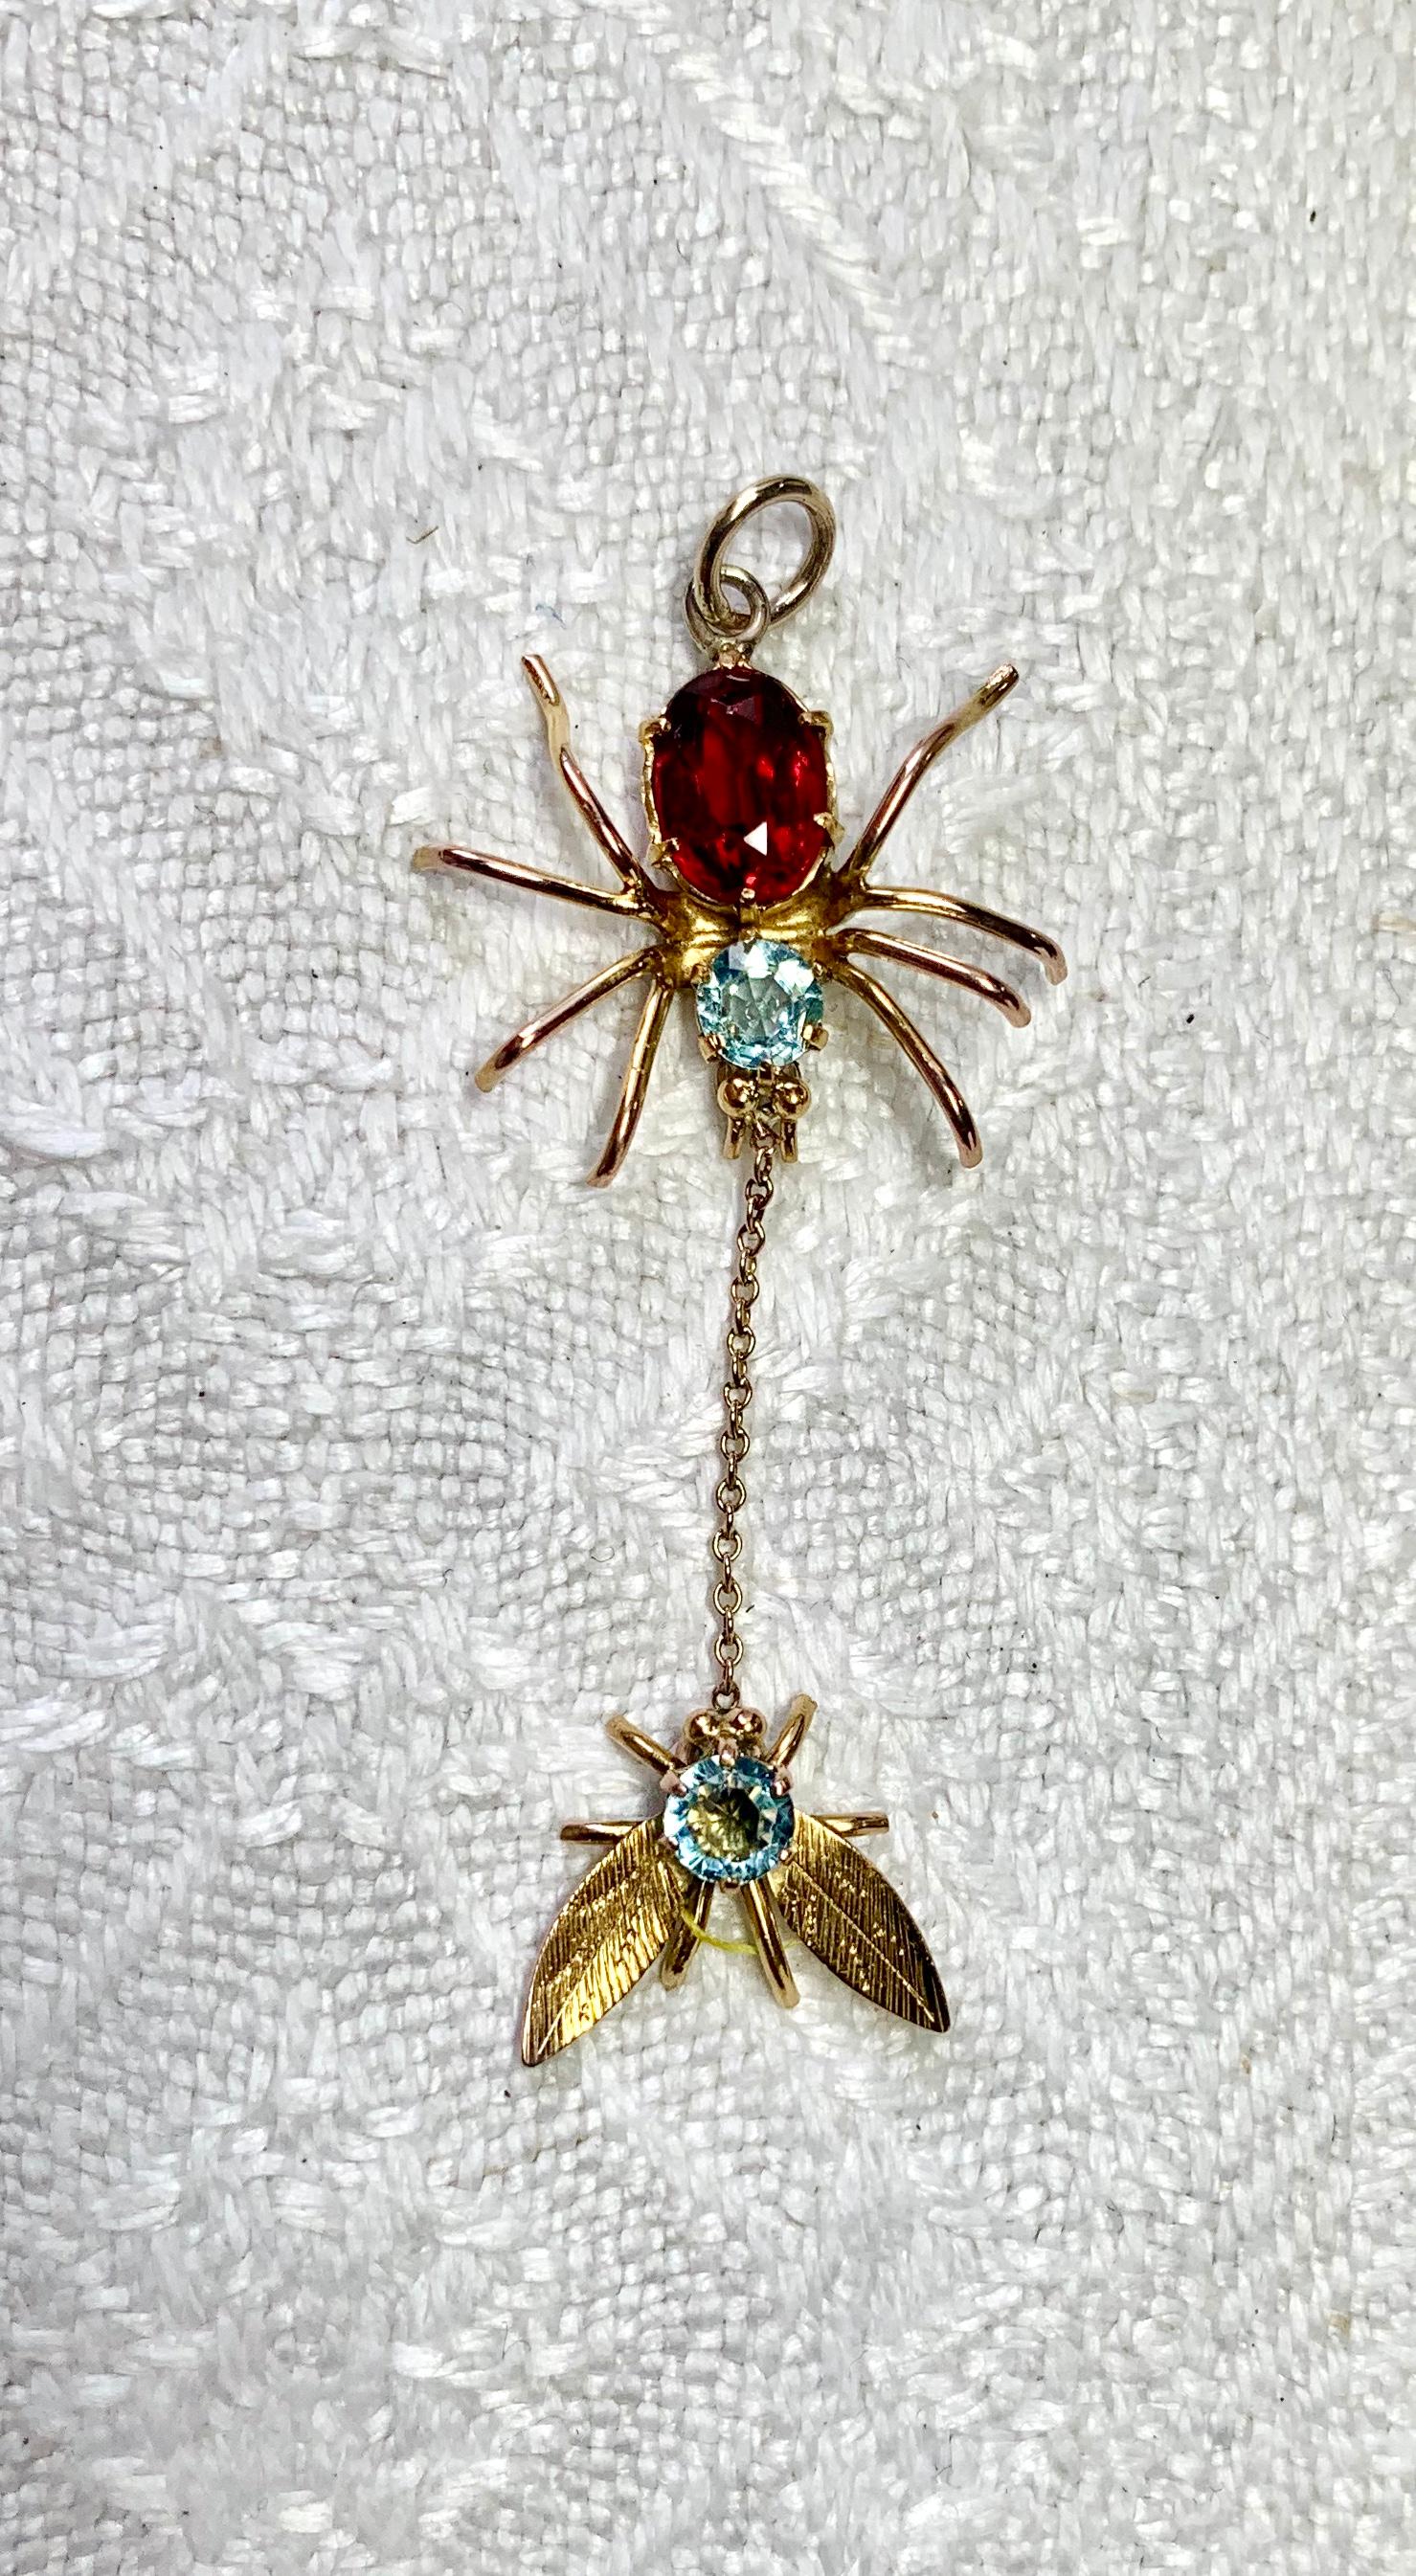 A wonderful antique Art Deco Spider and Fly Pendant set with fine Aquamarine and Garnet gems!  The gorgeous spider and fly are set with two round faceted Aquamarines.  The spider has an oval faceted Garnet body.  The jewels are set in 9 Carat Gold.